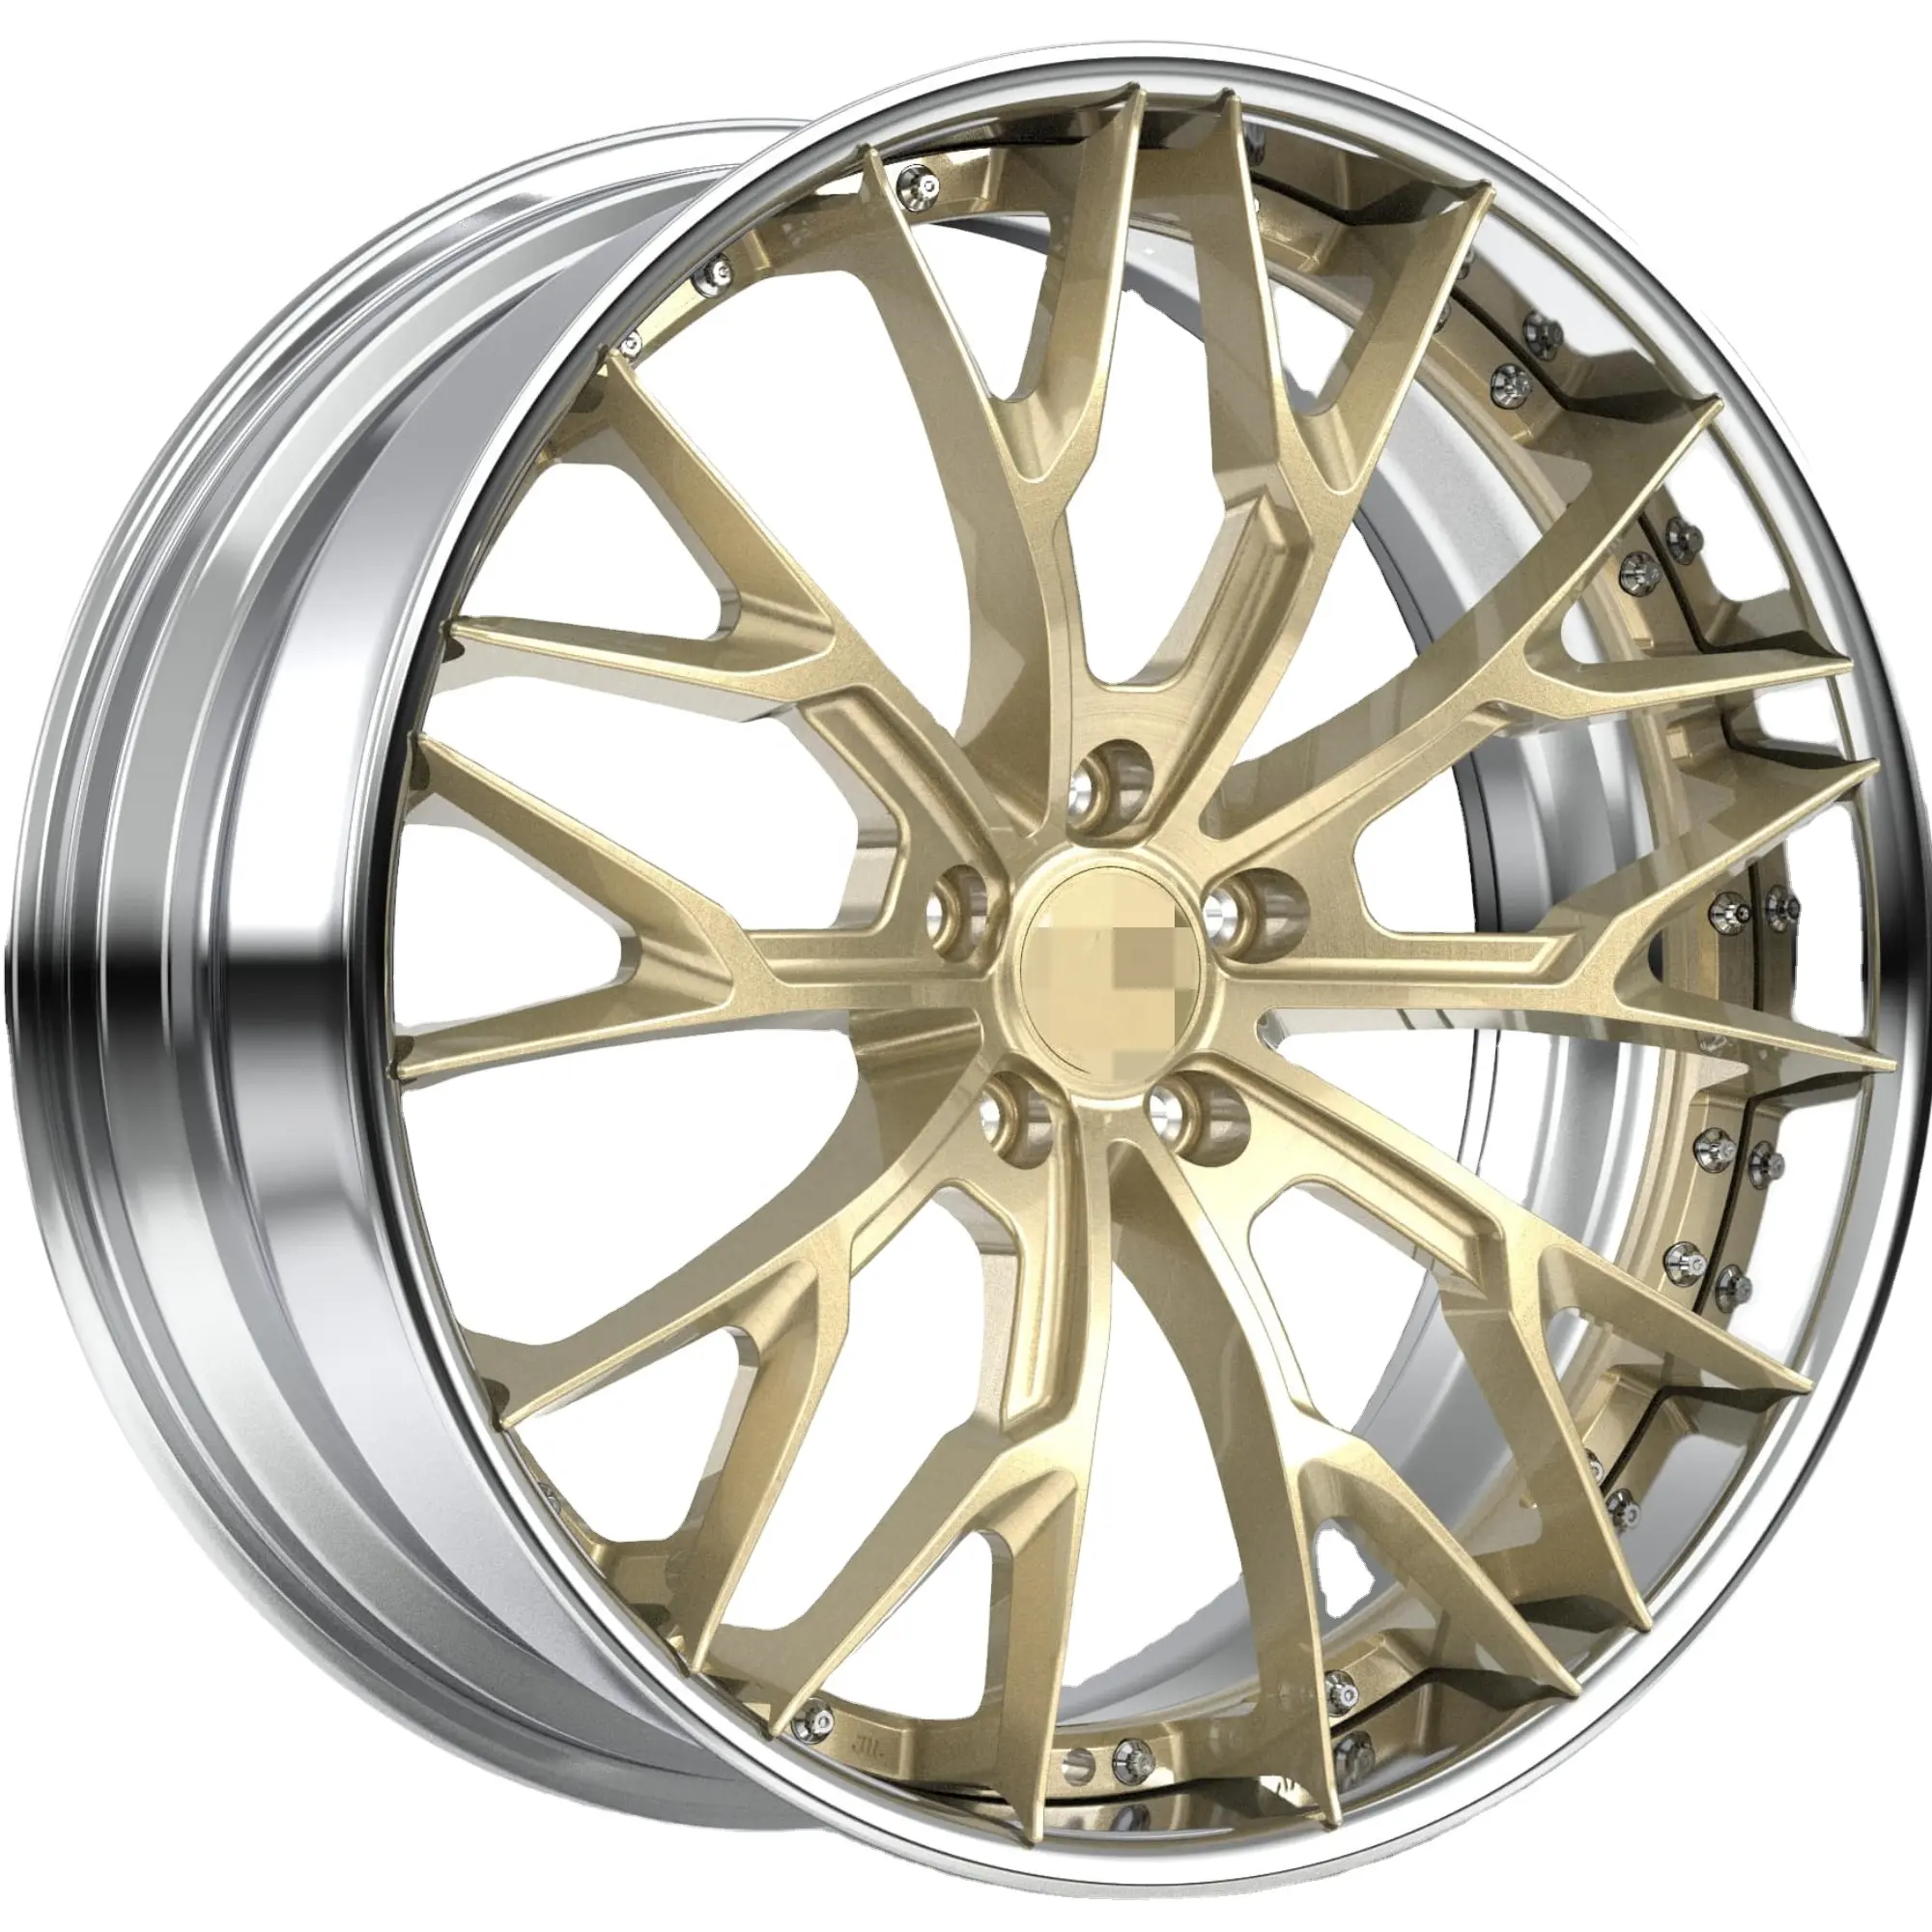 17 18 19 20 Inch Passenger Car Chromed Gold & Silver Machined Rim Forged 2 Piece Forged Alloy Aluminum Wheels Rims